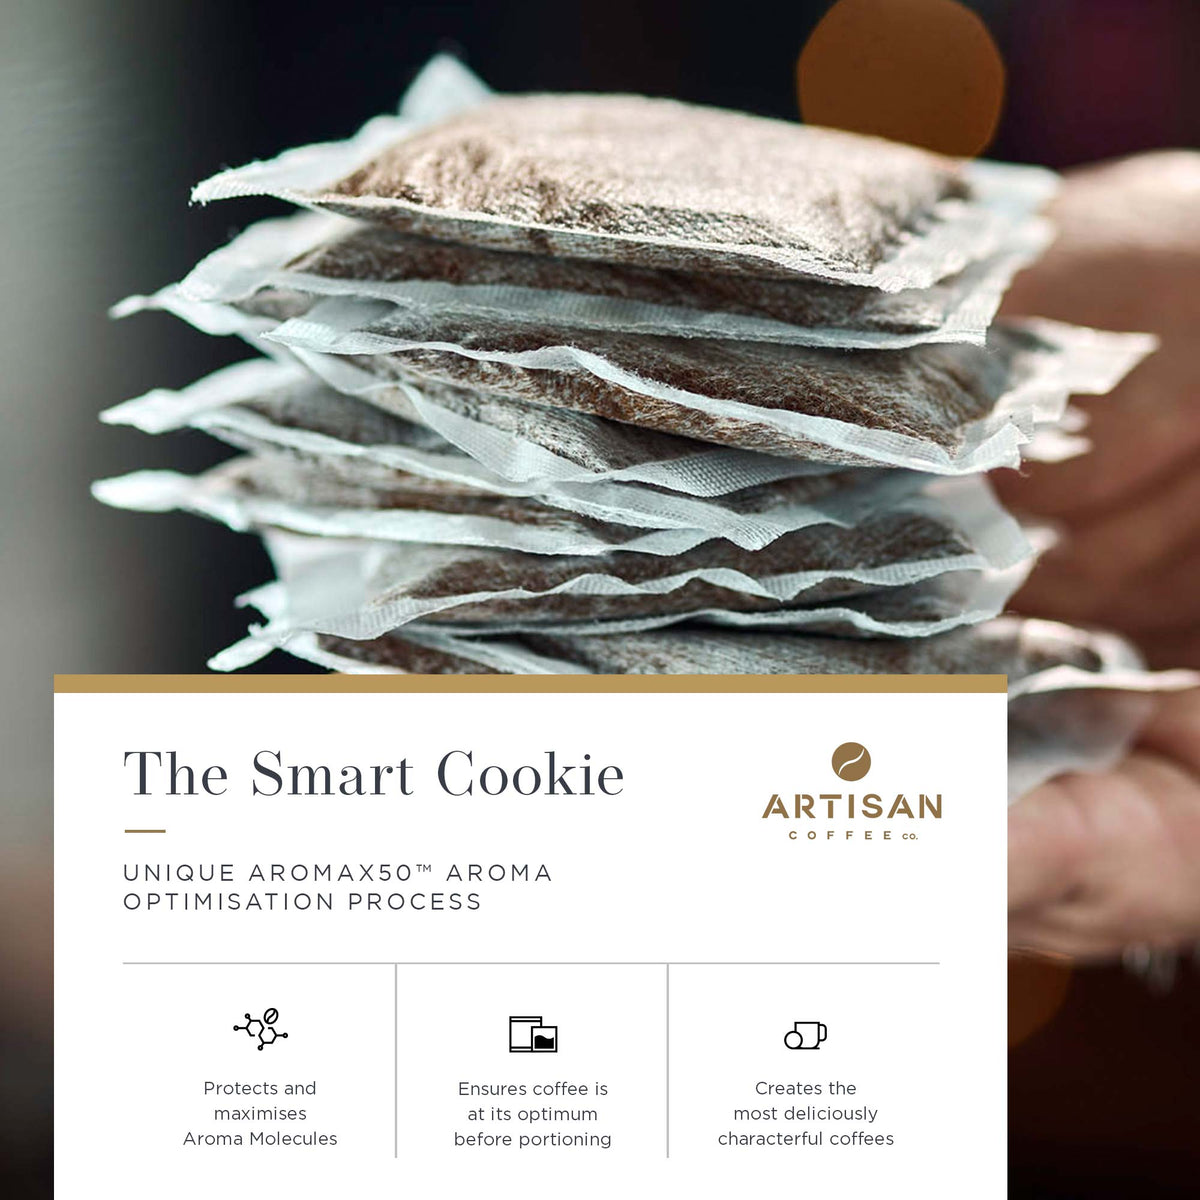 Artisan Coffee Co The Smart Cookie Coffee bags Infographic Aroma